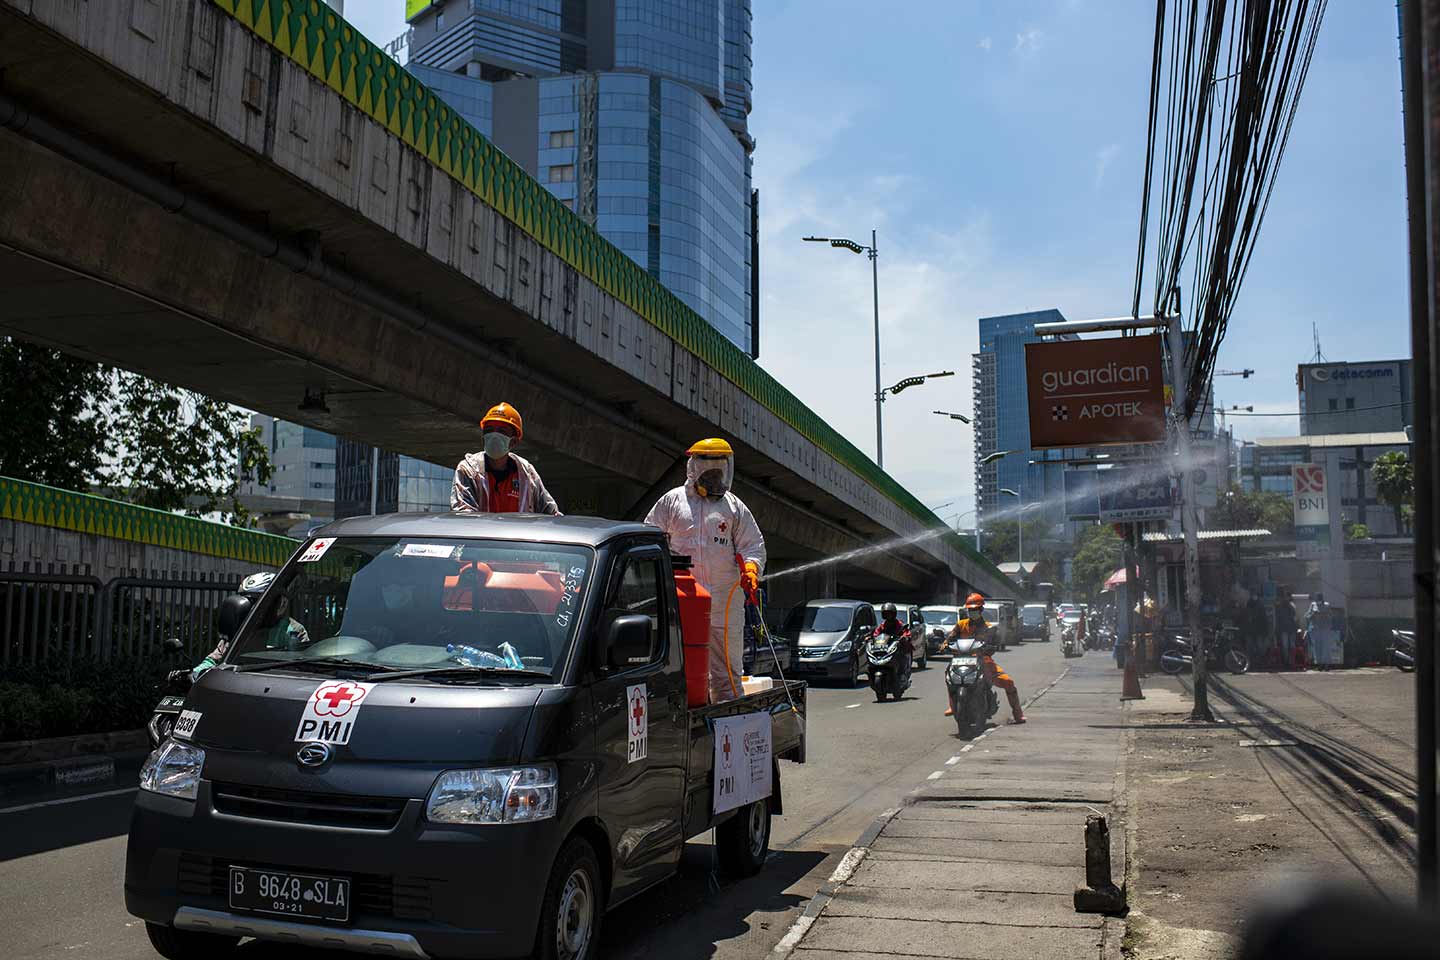 The Indonesian Red Cross spraying disinfectants on its own streets to fight with Covid-19 in Jakarta, Indonesia in March, 2020.  Credit: UNICEF/2020/Arimacs Wilander